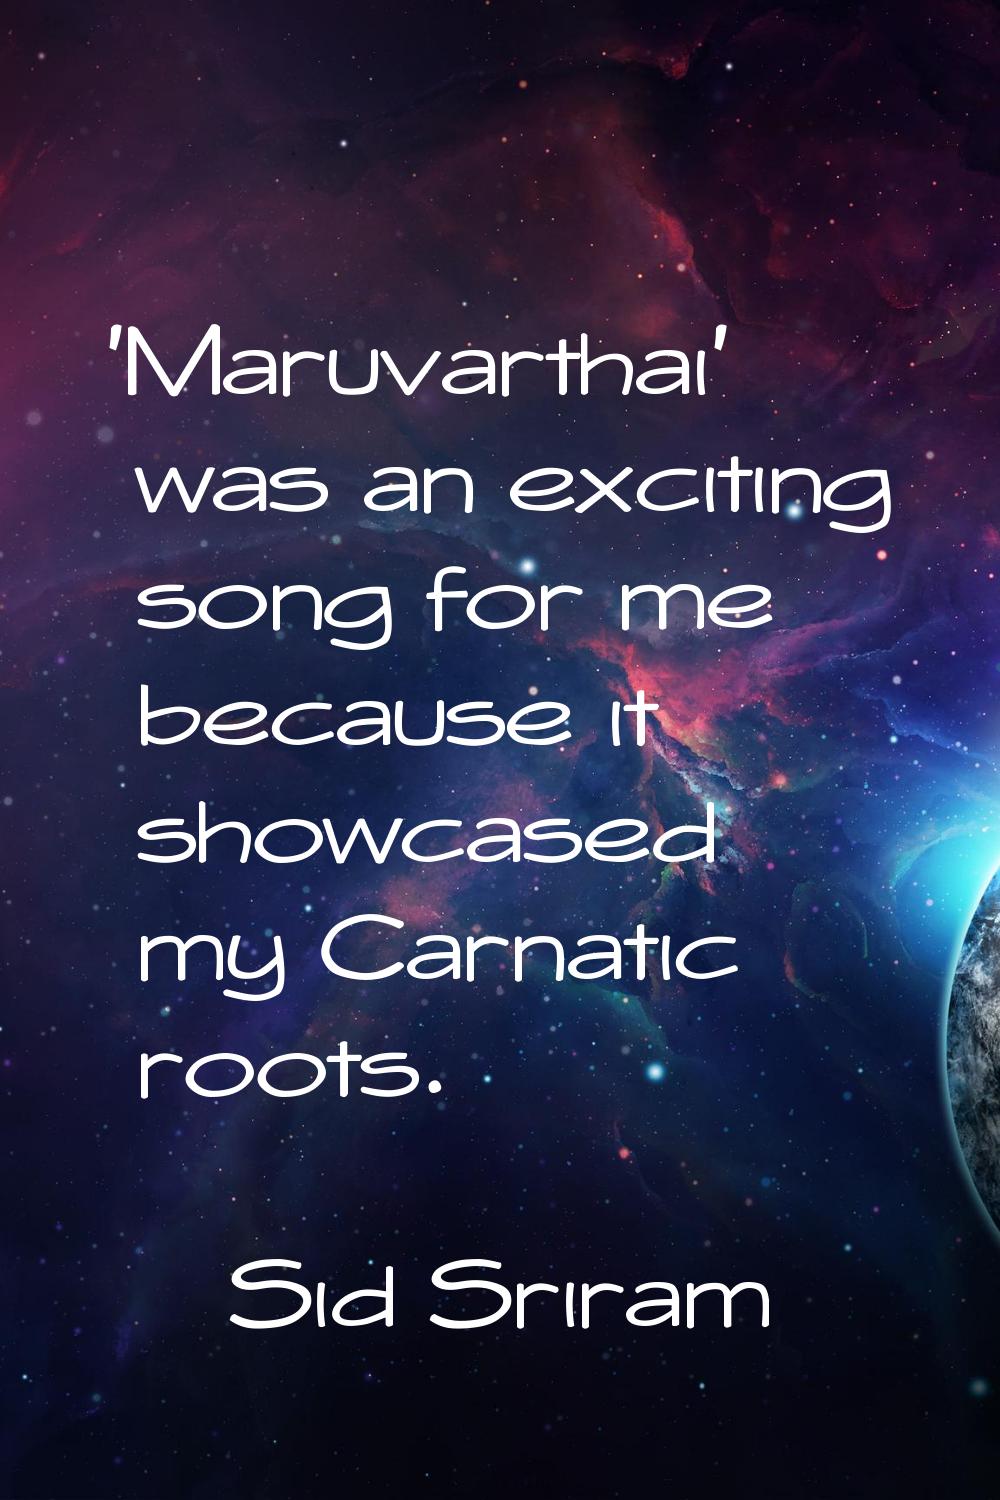 'Maruvarthai' was an exciting song for me because it showcased my Carnatic roots.